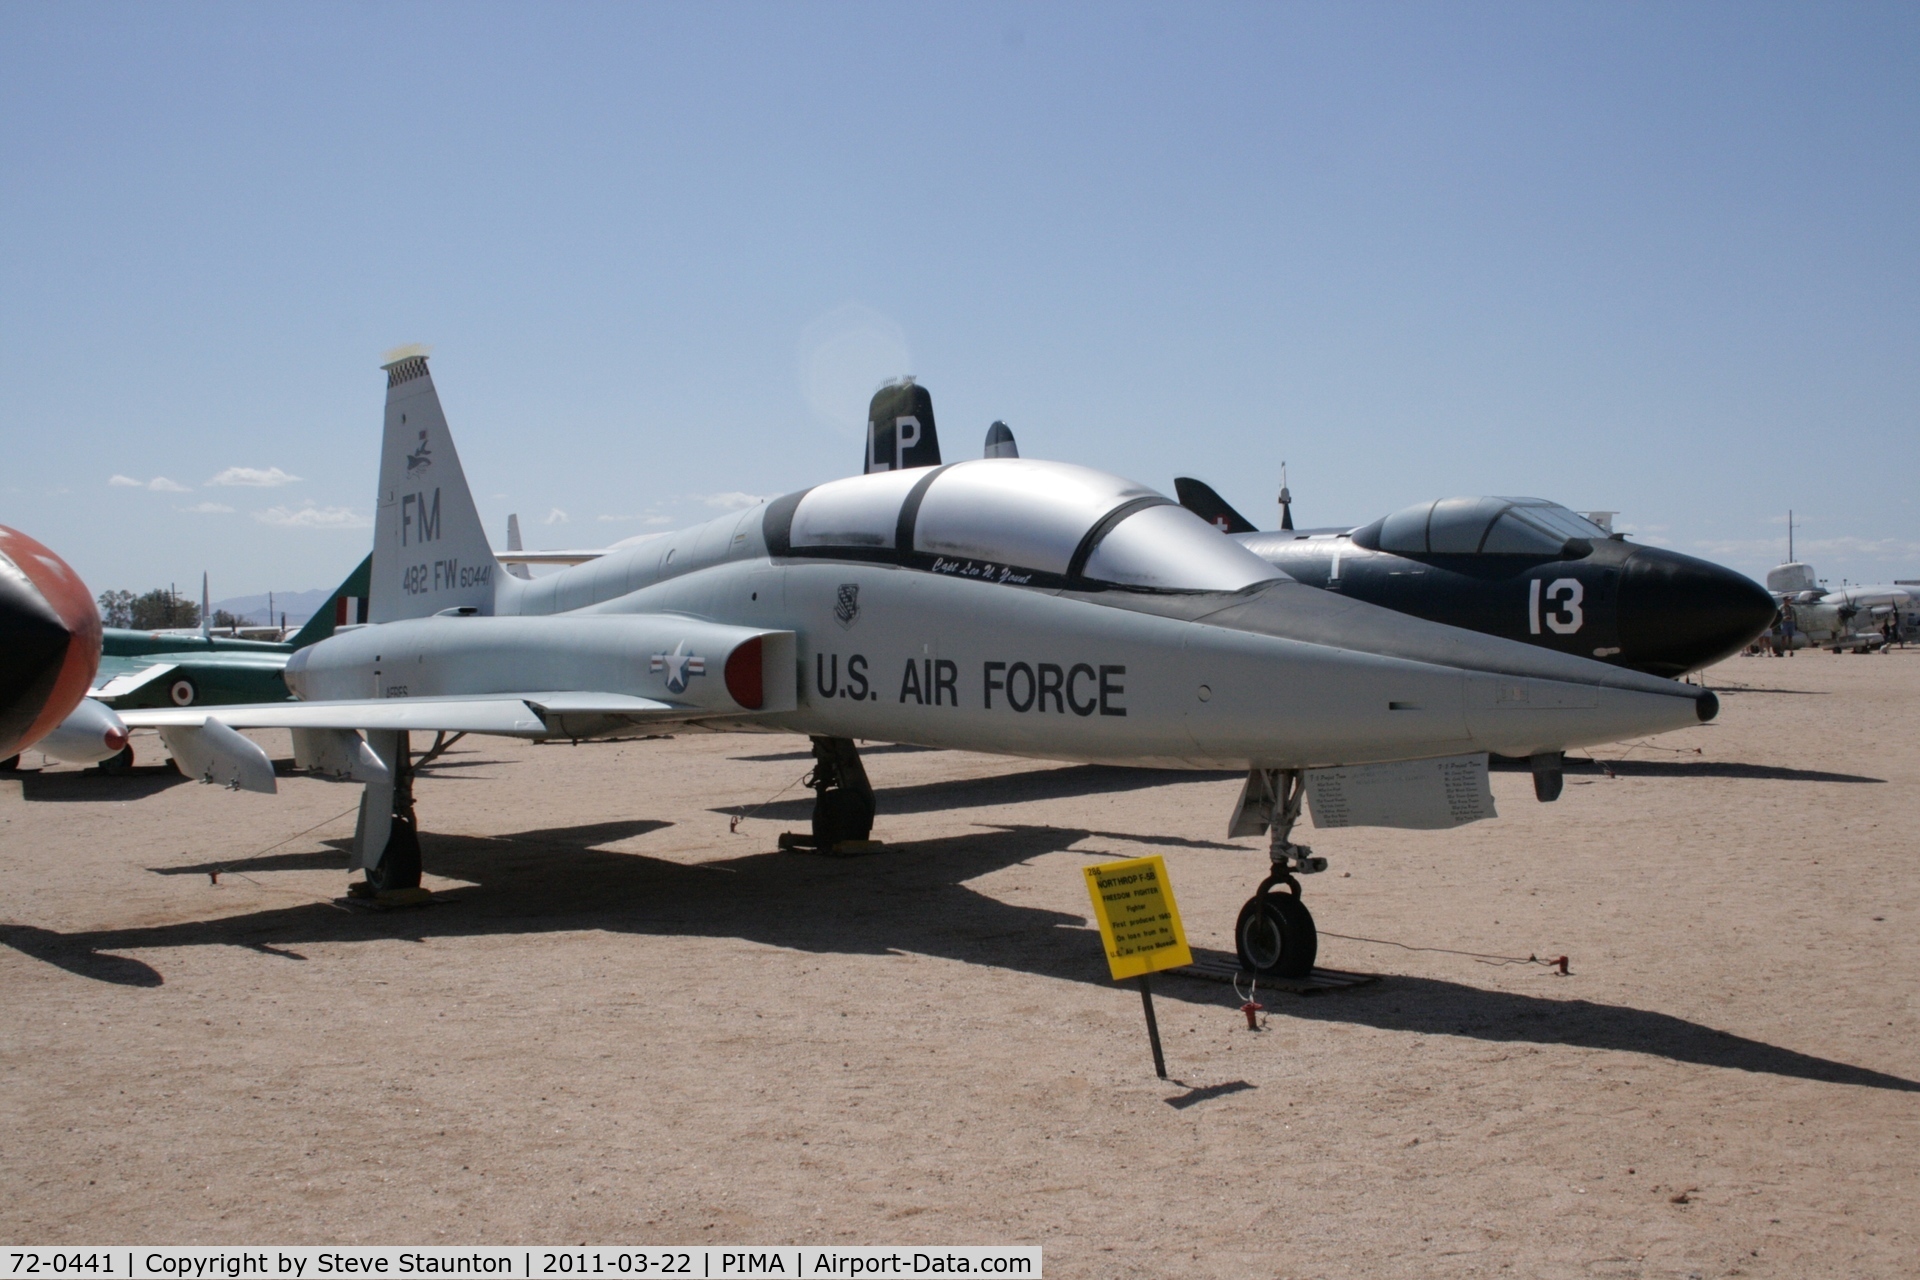 72-0441, Northrop GF-5B Freedom Fighter C/N N.8092, Taken at Pima Air and Space Museum, in March 2011 whilst on an Aeroprint Aviation tour